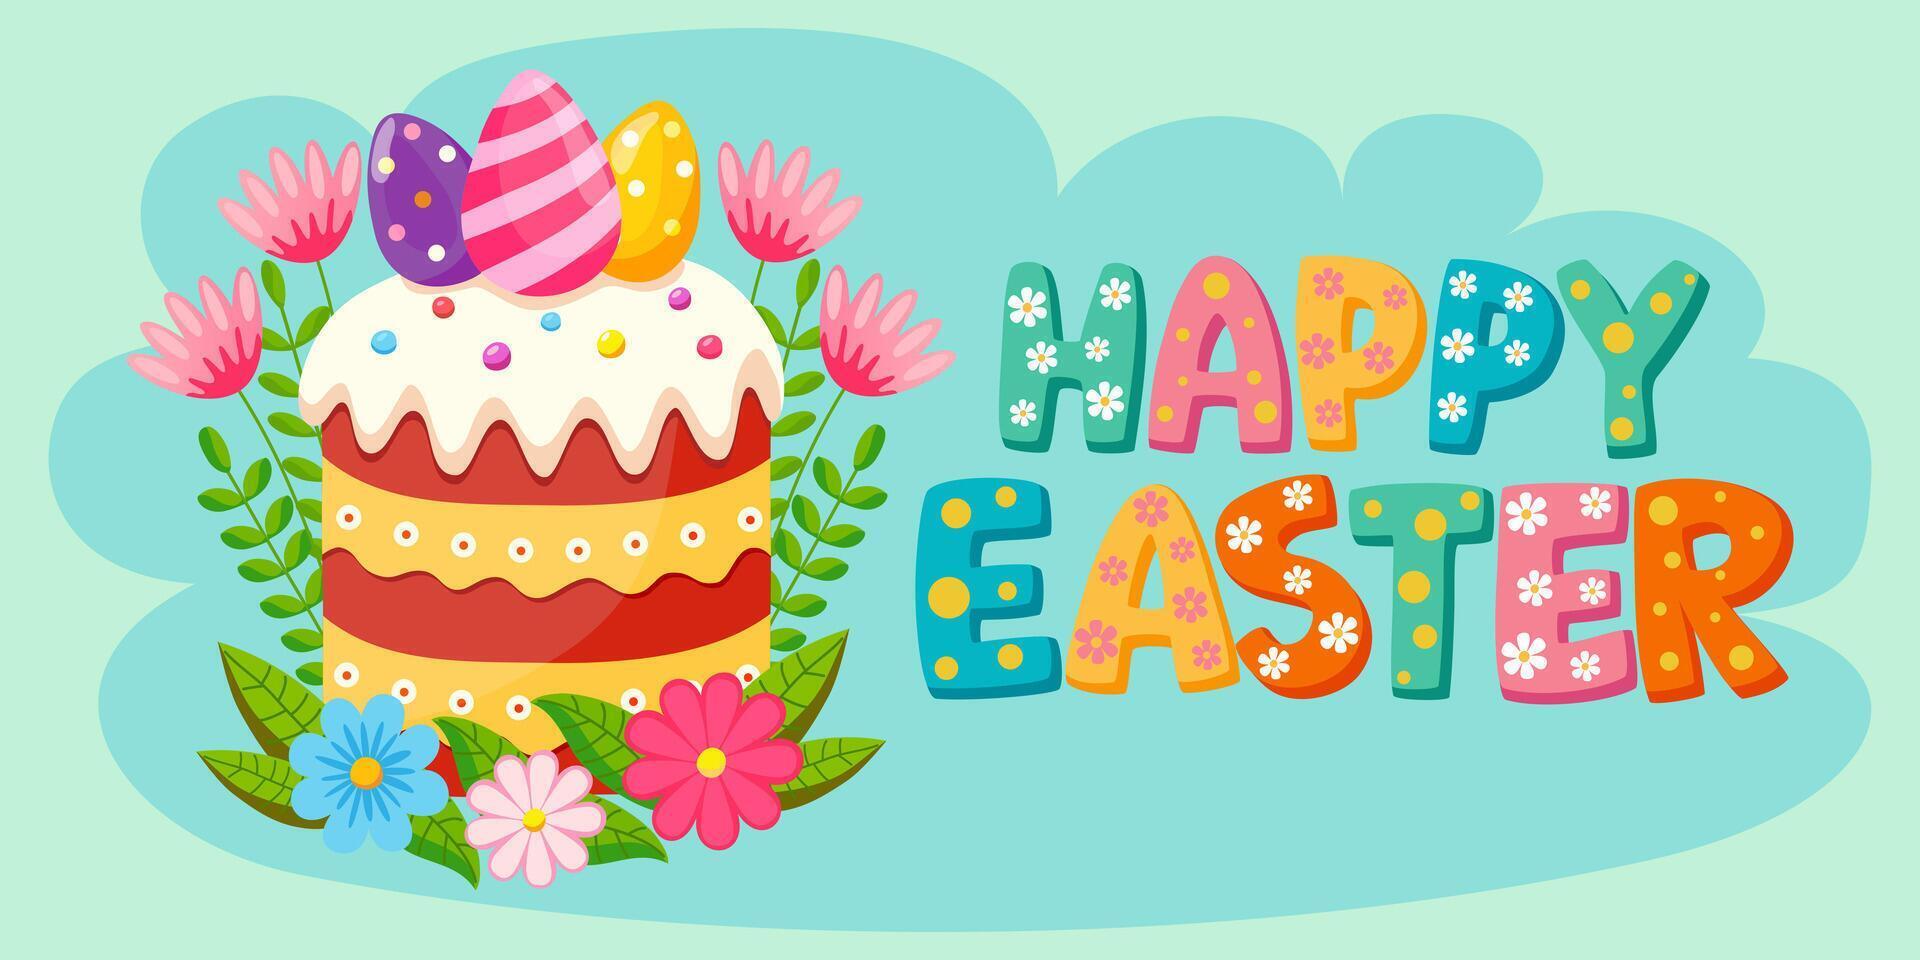 Colorful cheerful poster for Happy Easter. Easter background with holiday symbols. Colored eggs, Easter cake, spring flowers and herbs. Vector illustration.